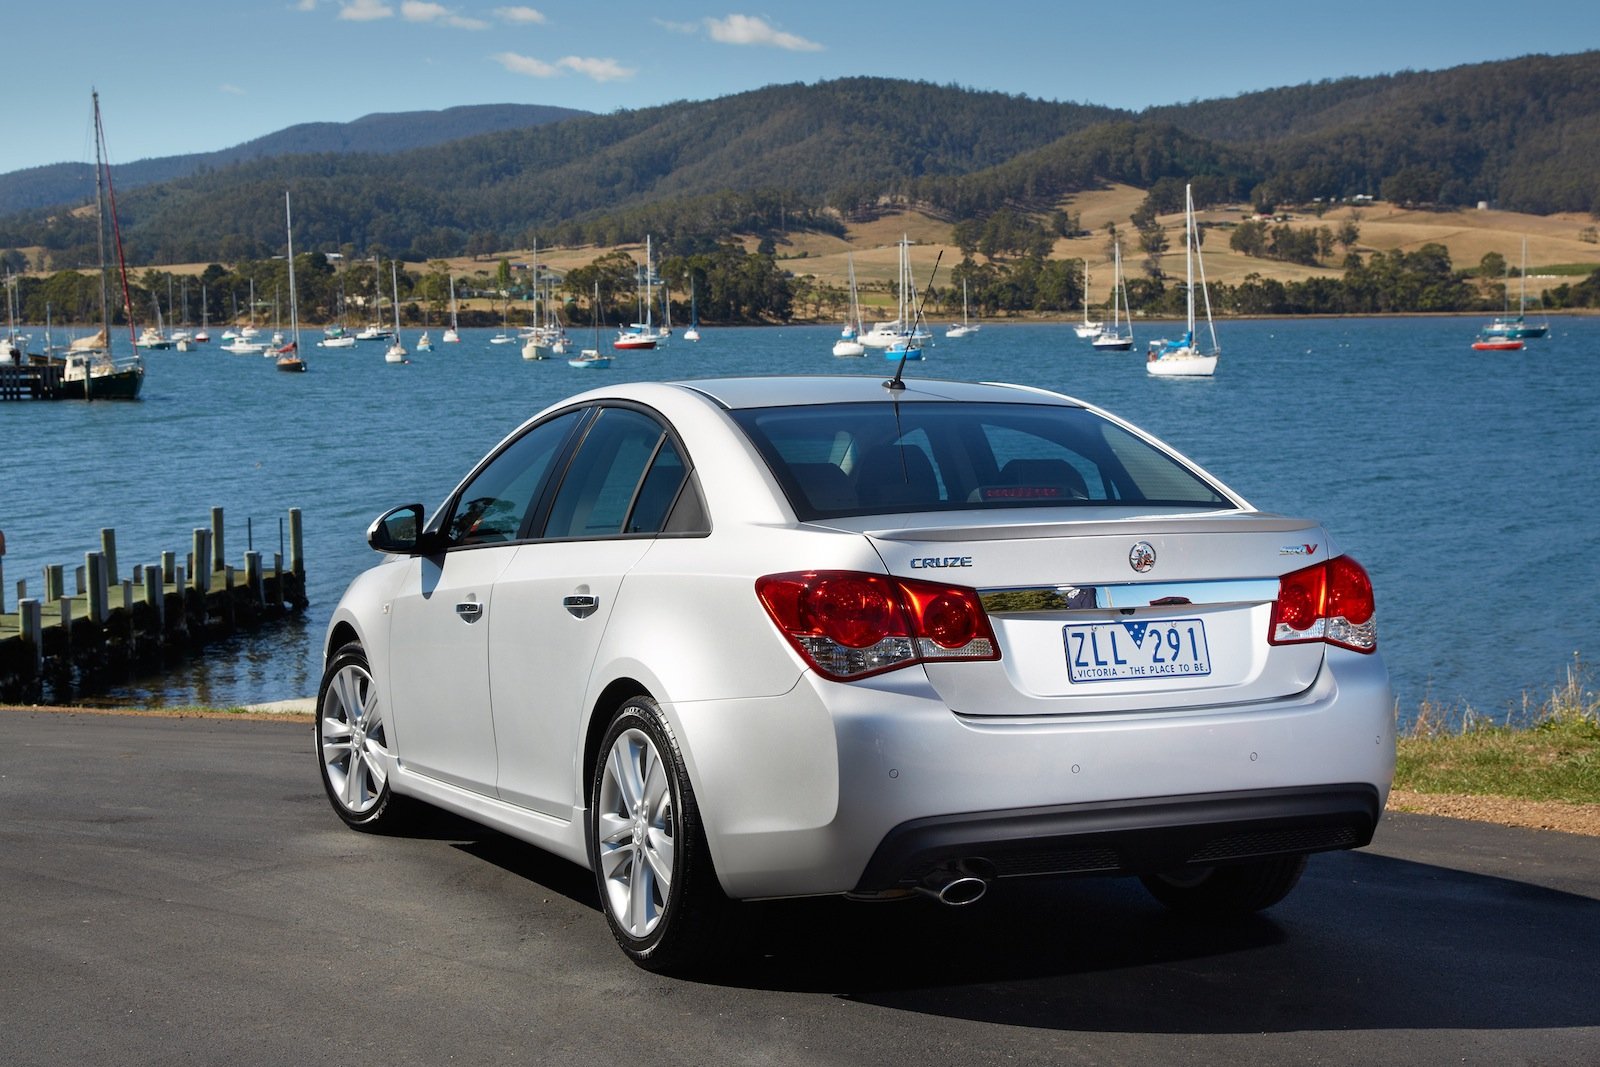 holden cruze 1.6 turbo review